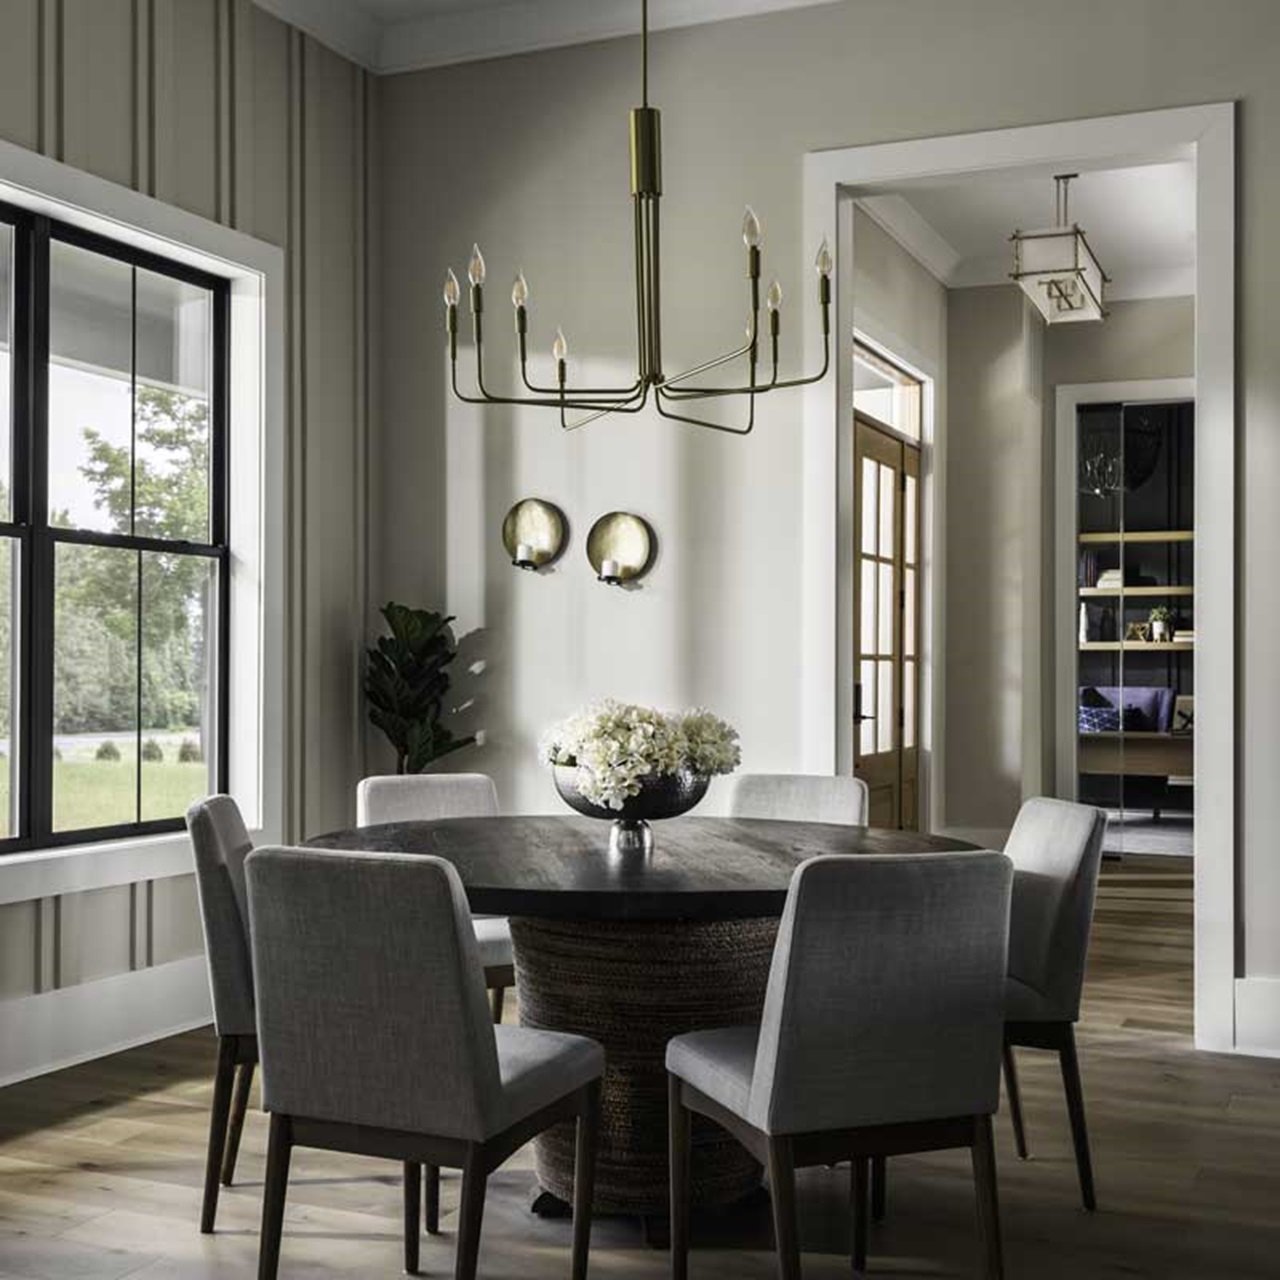 Marvin Essential Double Hung Windows in a Dining room